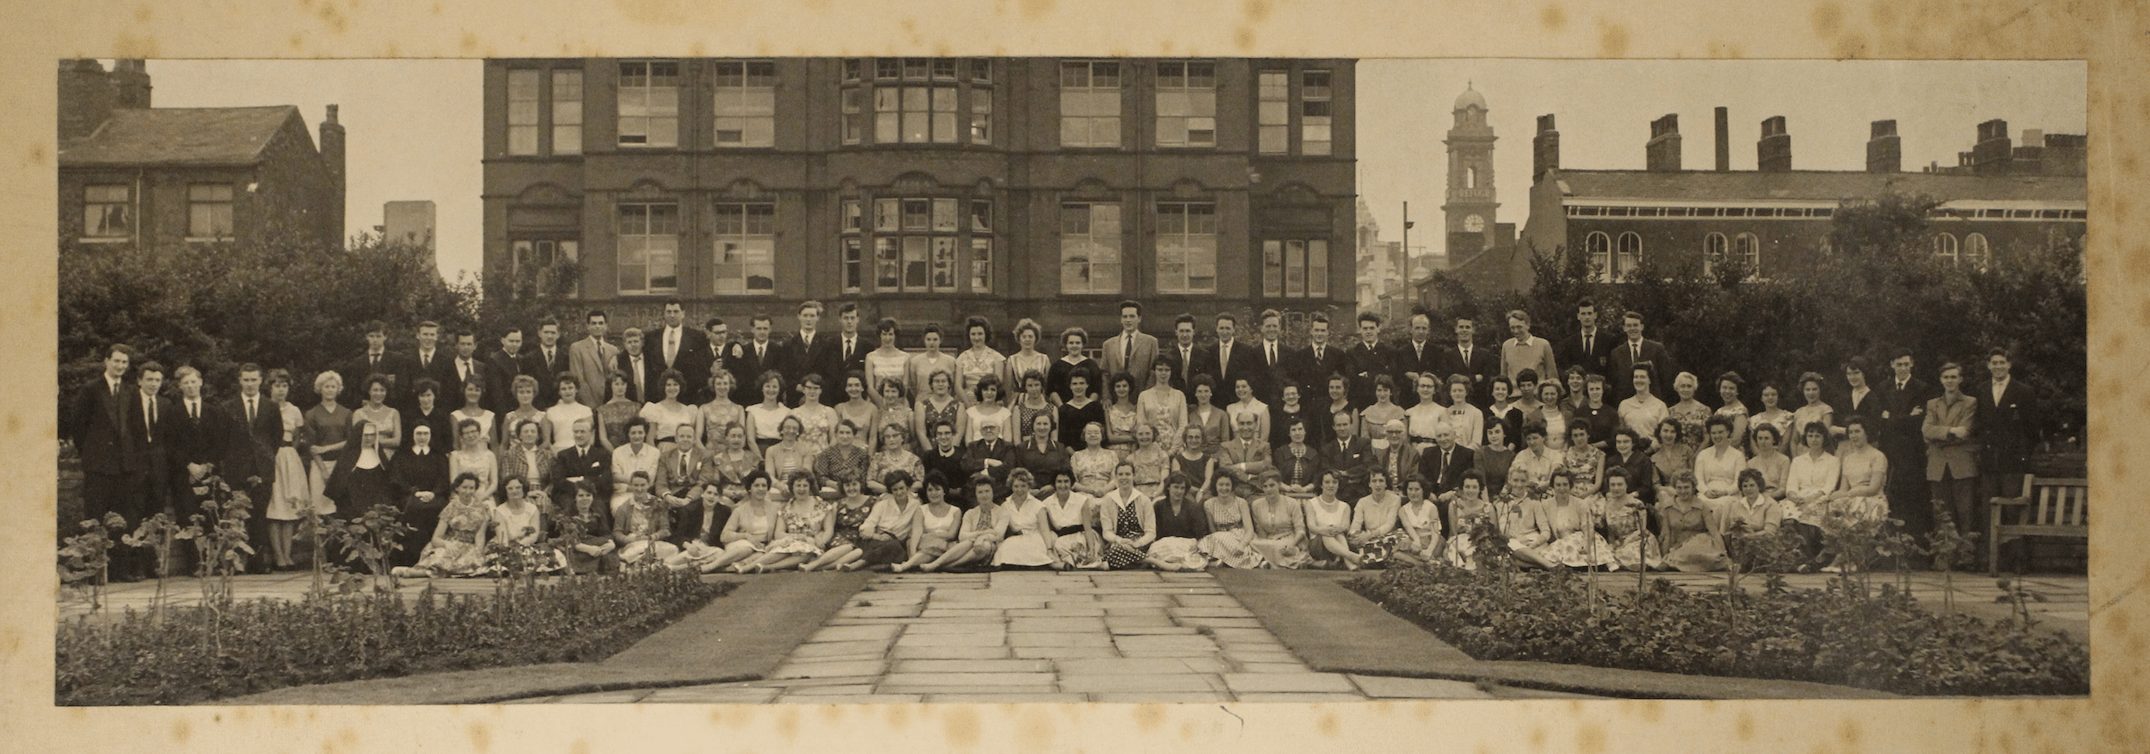 Large group picture of students, tutors and nuns outside dressed in suits and dresses.